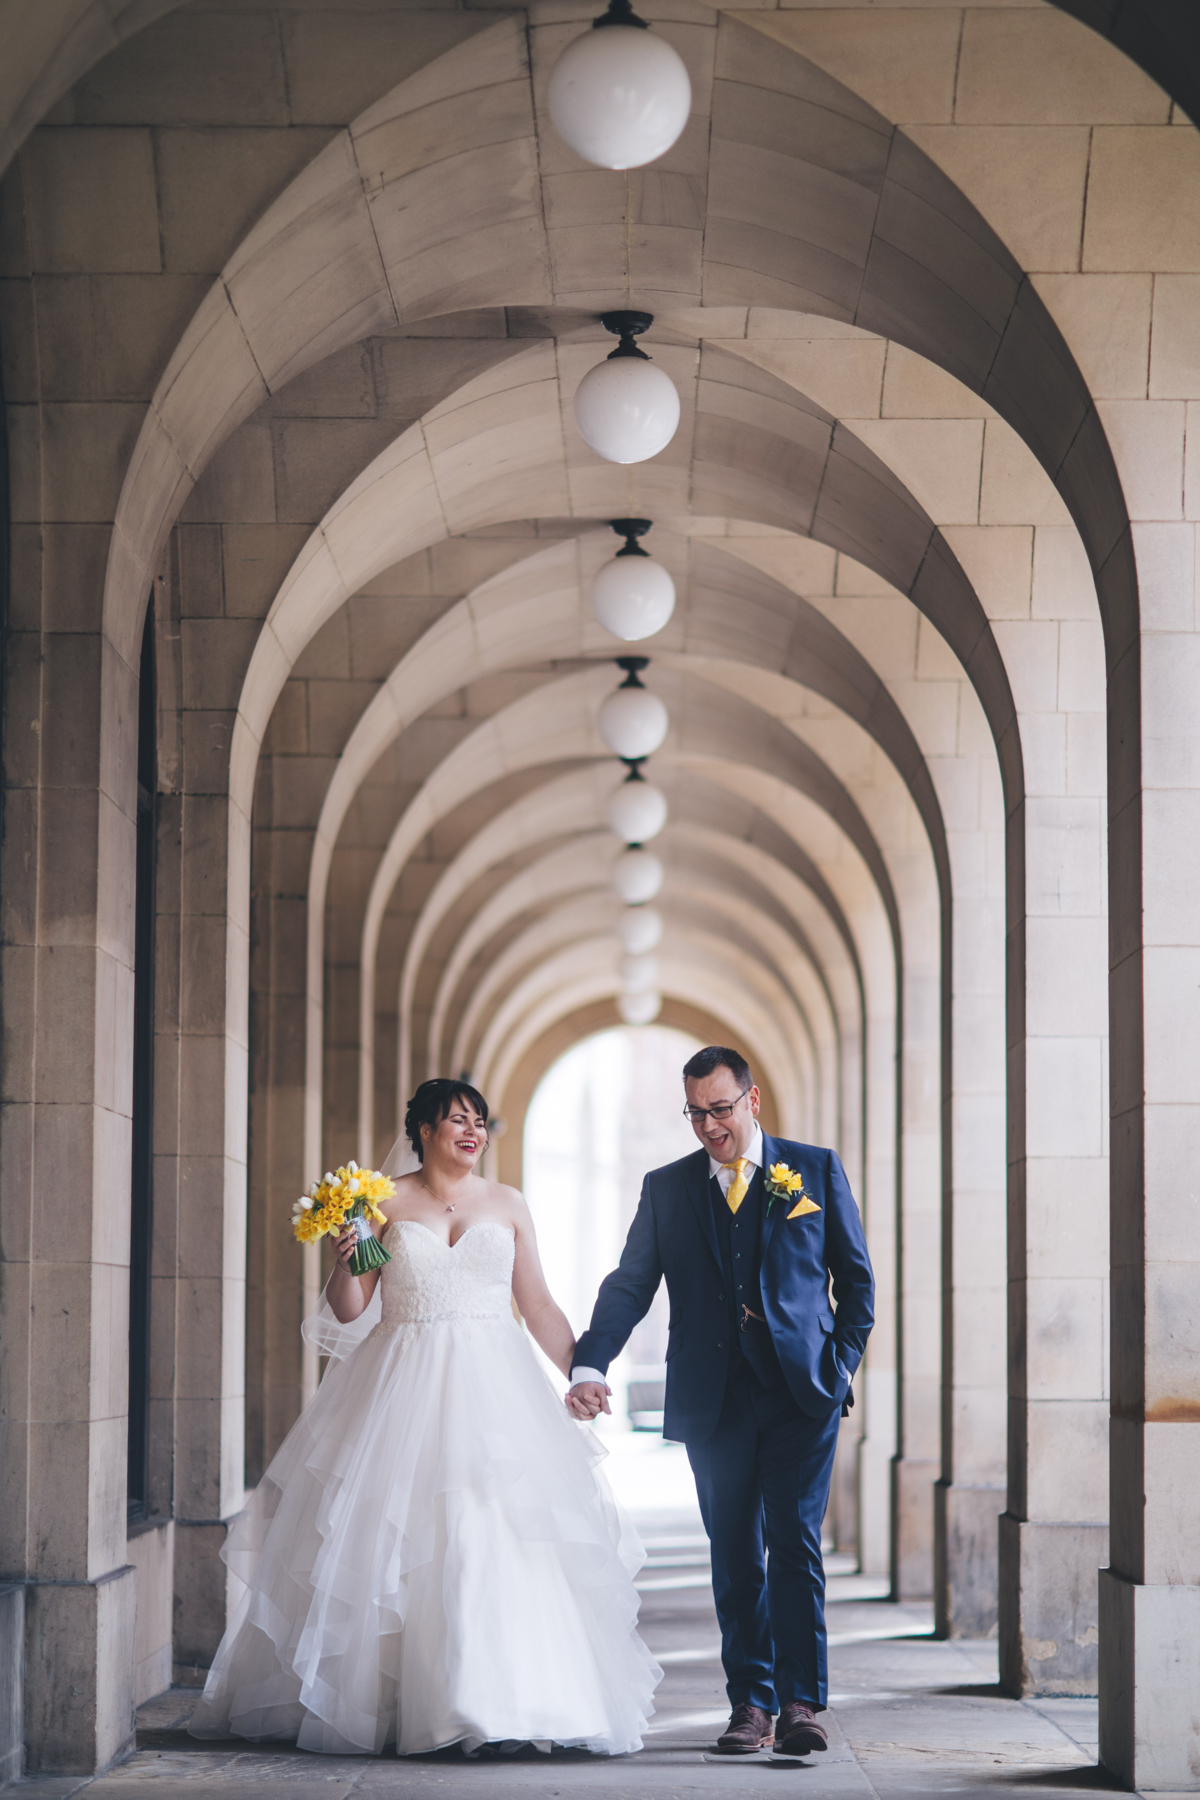 Bride and groom walking hand in hand along a outdoor corridor of arches with circular lights above them